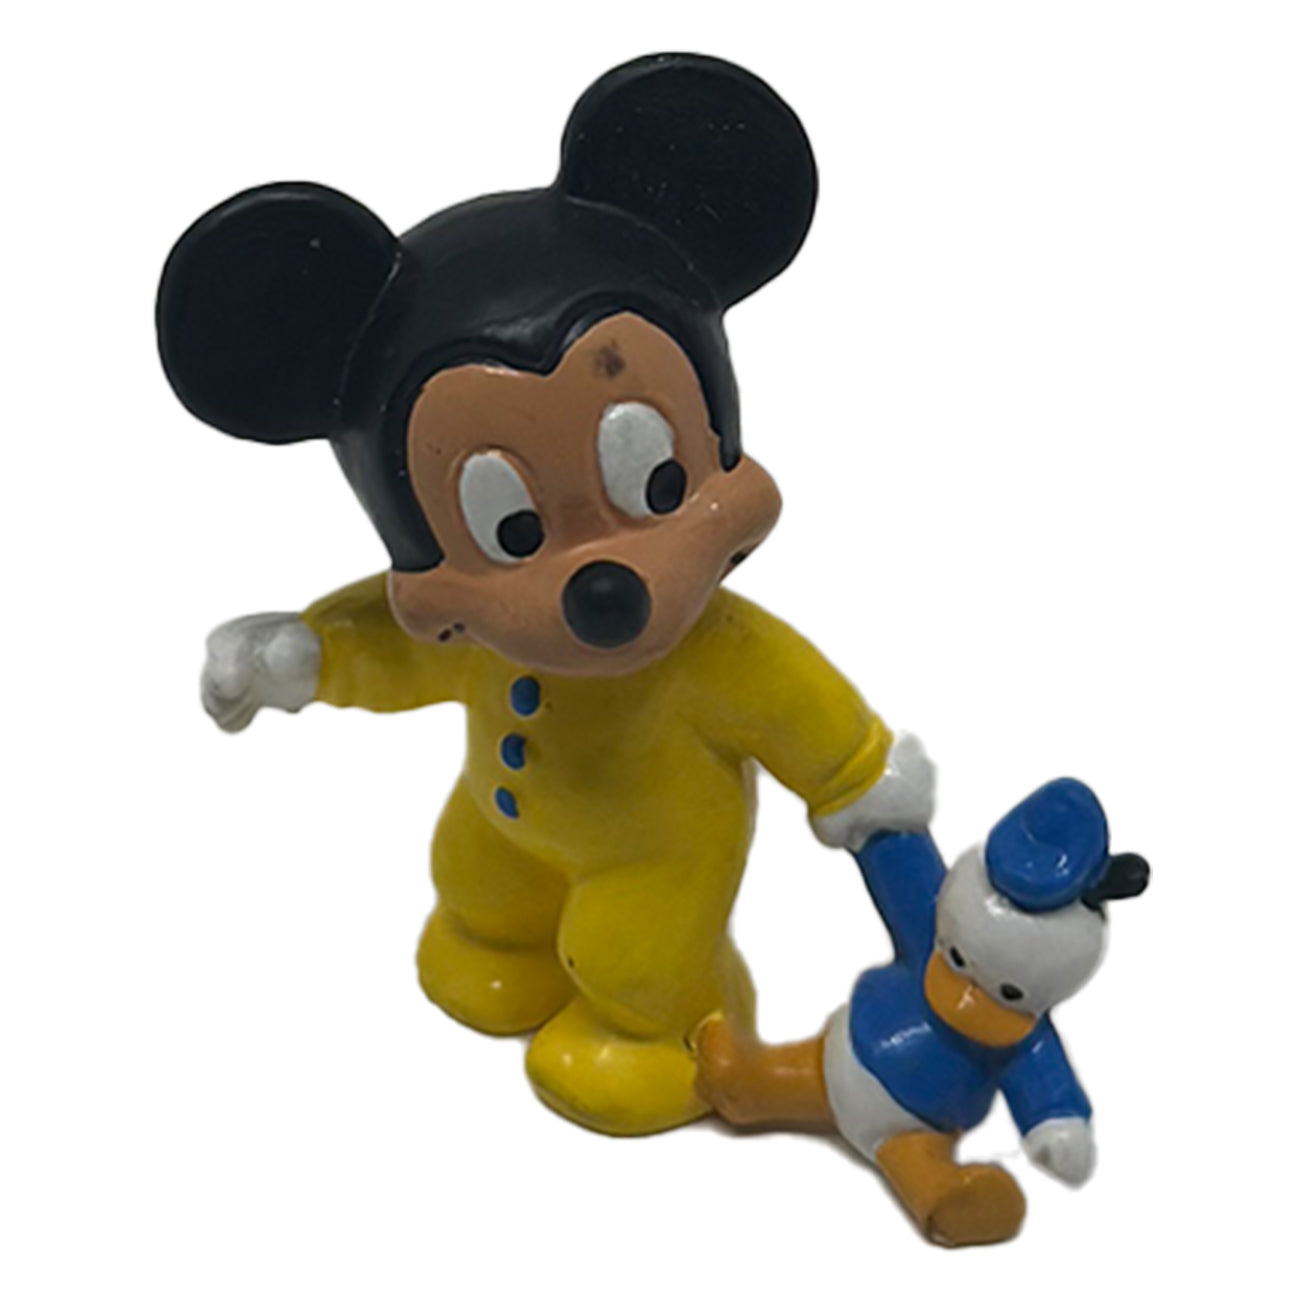 Disney - Mickey Mouse Baby with Donald Duck 1985 - Figure 5cm 